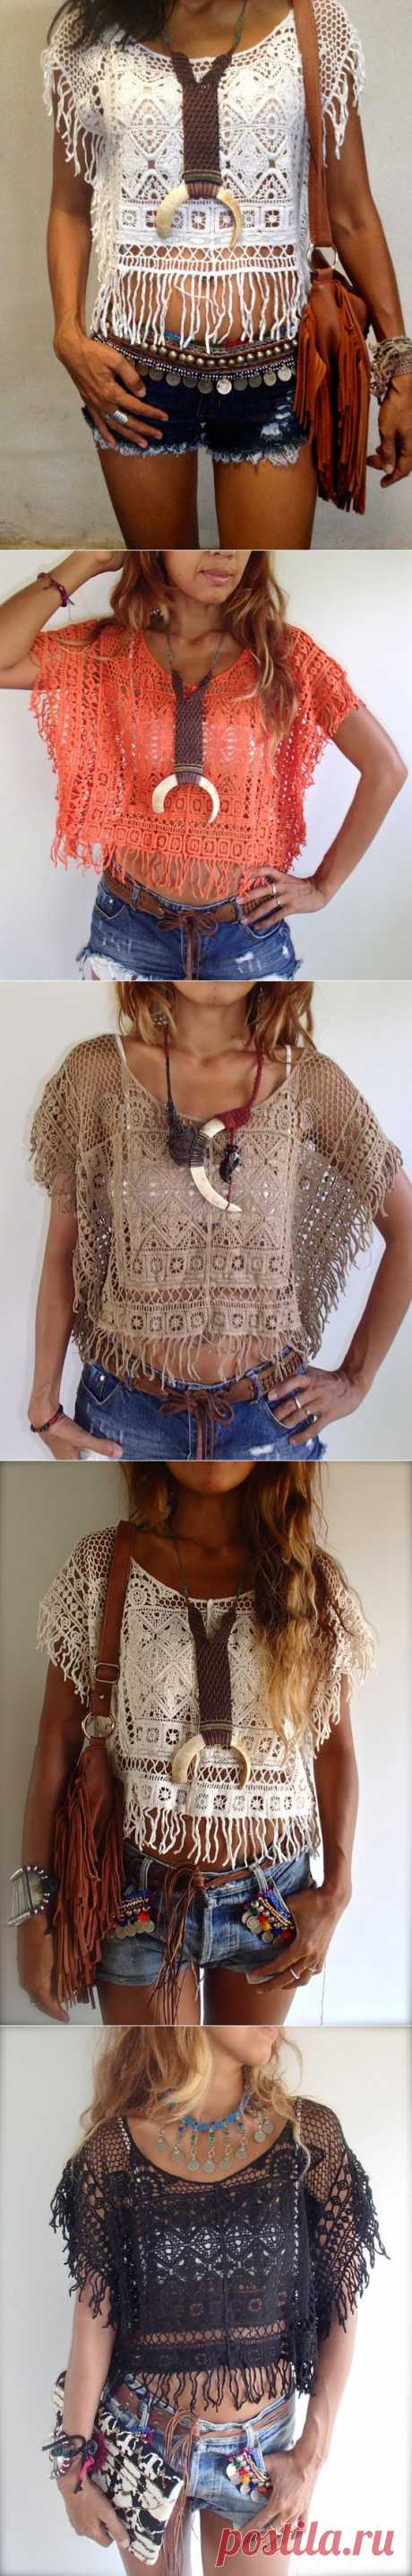 Boho lace Top. One size. White Black Beige Brown and от PadMa88